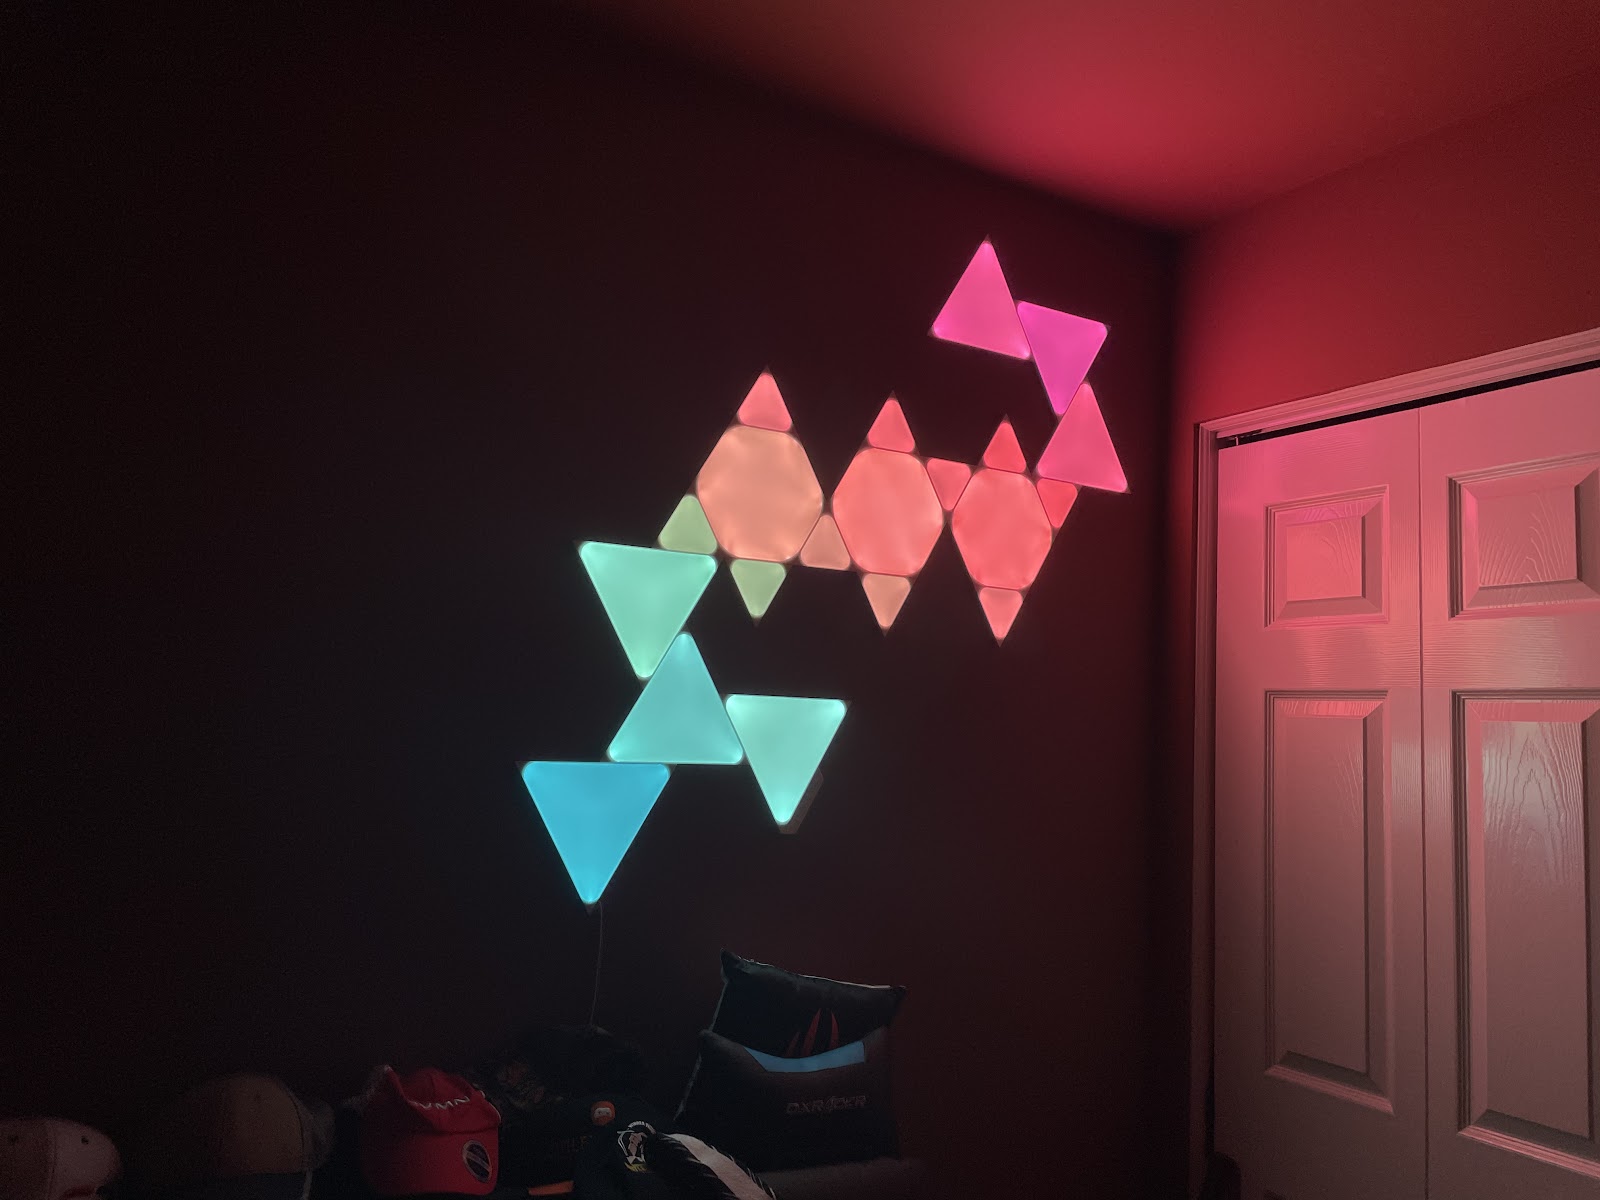 Opdage Hane Modsigelse Starsnipe on Twitter: "It's official, I've fallen in love with my new @ nanoleaf light panels (expect to see them in the background of our streams  moving forward👀) Pick some up for yourself